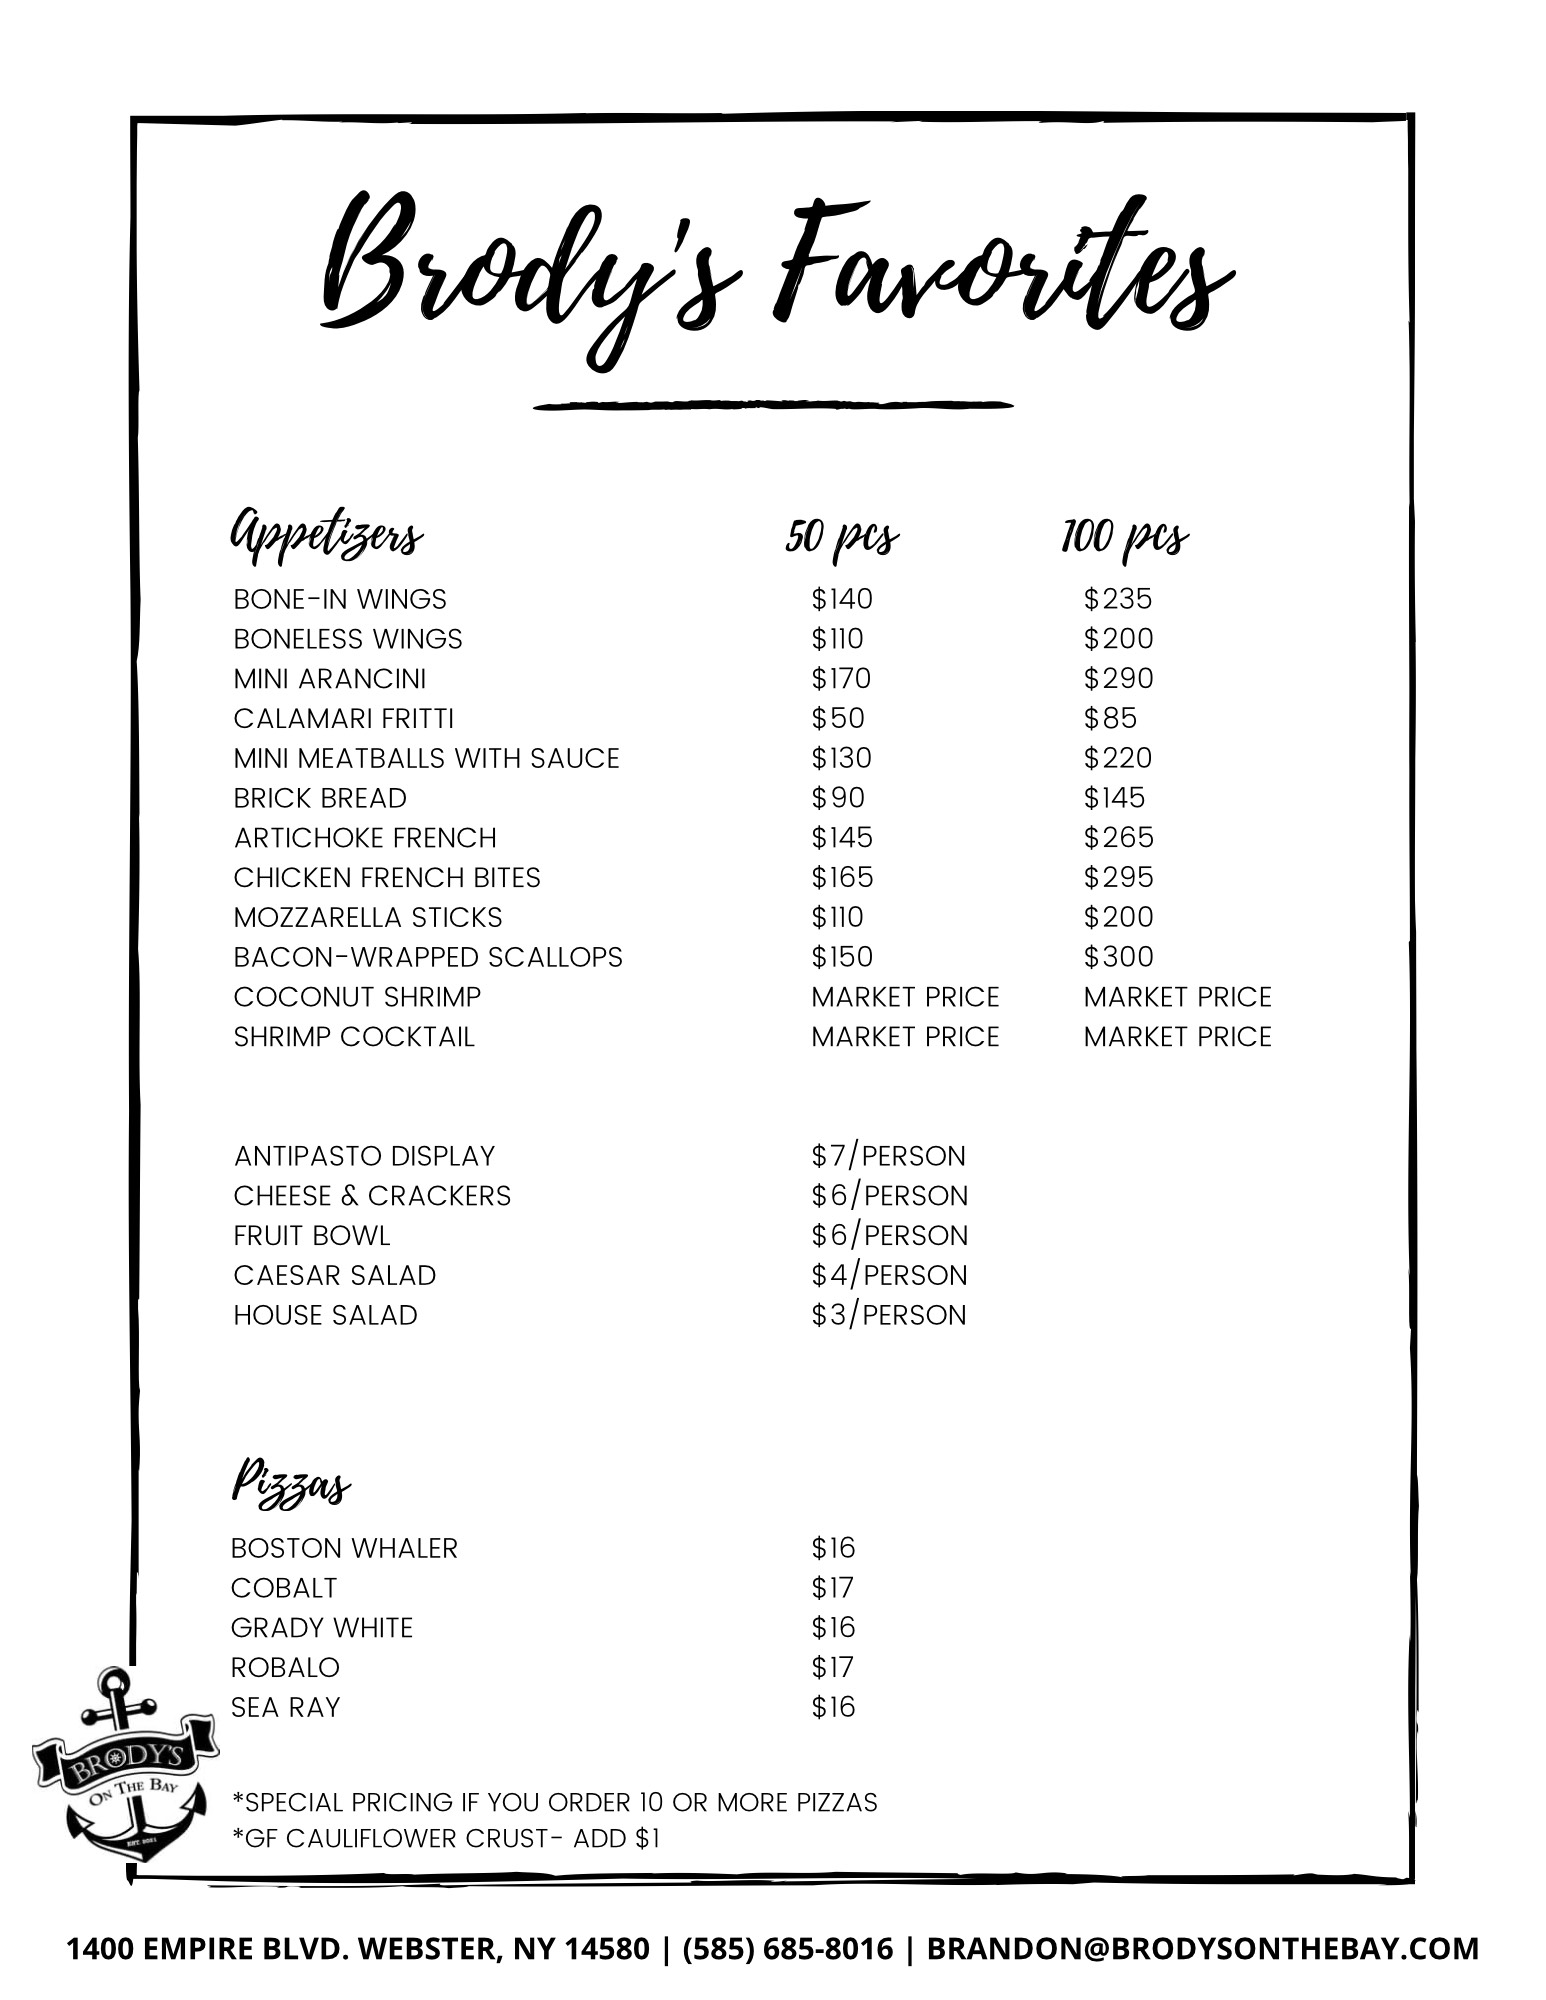 Brody's Catering Packages - Brody's Favorites